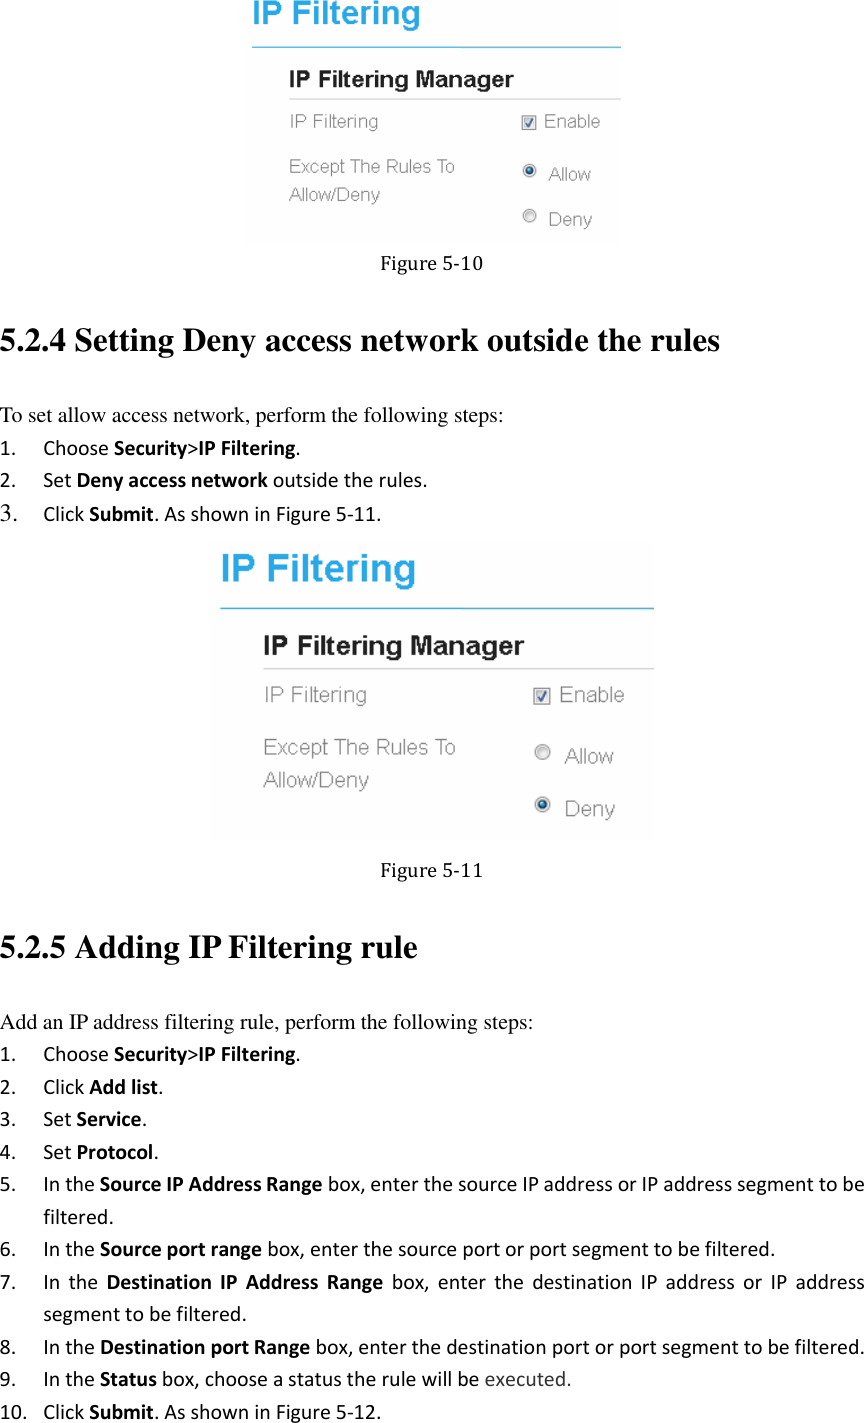    Figure 5-10 5.2.4 Setting Deny access network outside the rules To set allow access network, perform the following steps: 1. Choose Security&gt;IP Filtering. 2. Set Deny access network outside the rules. 3. Click Submit. As shown in Figure 5-11.  Figure 5-11 5.2.5 Adding IP Filtering rule Add an IP address filtering rule, perform the following steps: 1. Choose Security&gt;IP Filtering. 2. Click Add list. 3. Set Service. 4. Set Protocol. 5. In the Source IP Address Range box, enter the source IP address or IP address segment to be filtered. 6. In the Source port range box, enter the source port or port segment to be filtered. 7. In the  Destination  IP  Address Range  box,  enter  the  destination  IP  address  or  IP  address segment to be filtered. 8. In the Destination port Range box, enter the destination port or port segment to be filtered. 9. In the Status box, choose a status the rule will be executed. 10. Click Submit. As shown in Figure 5-12. 